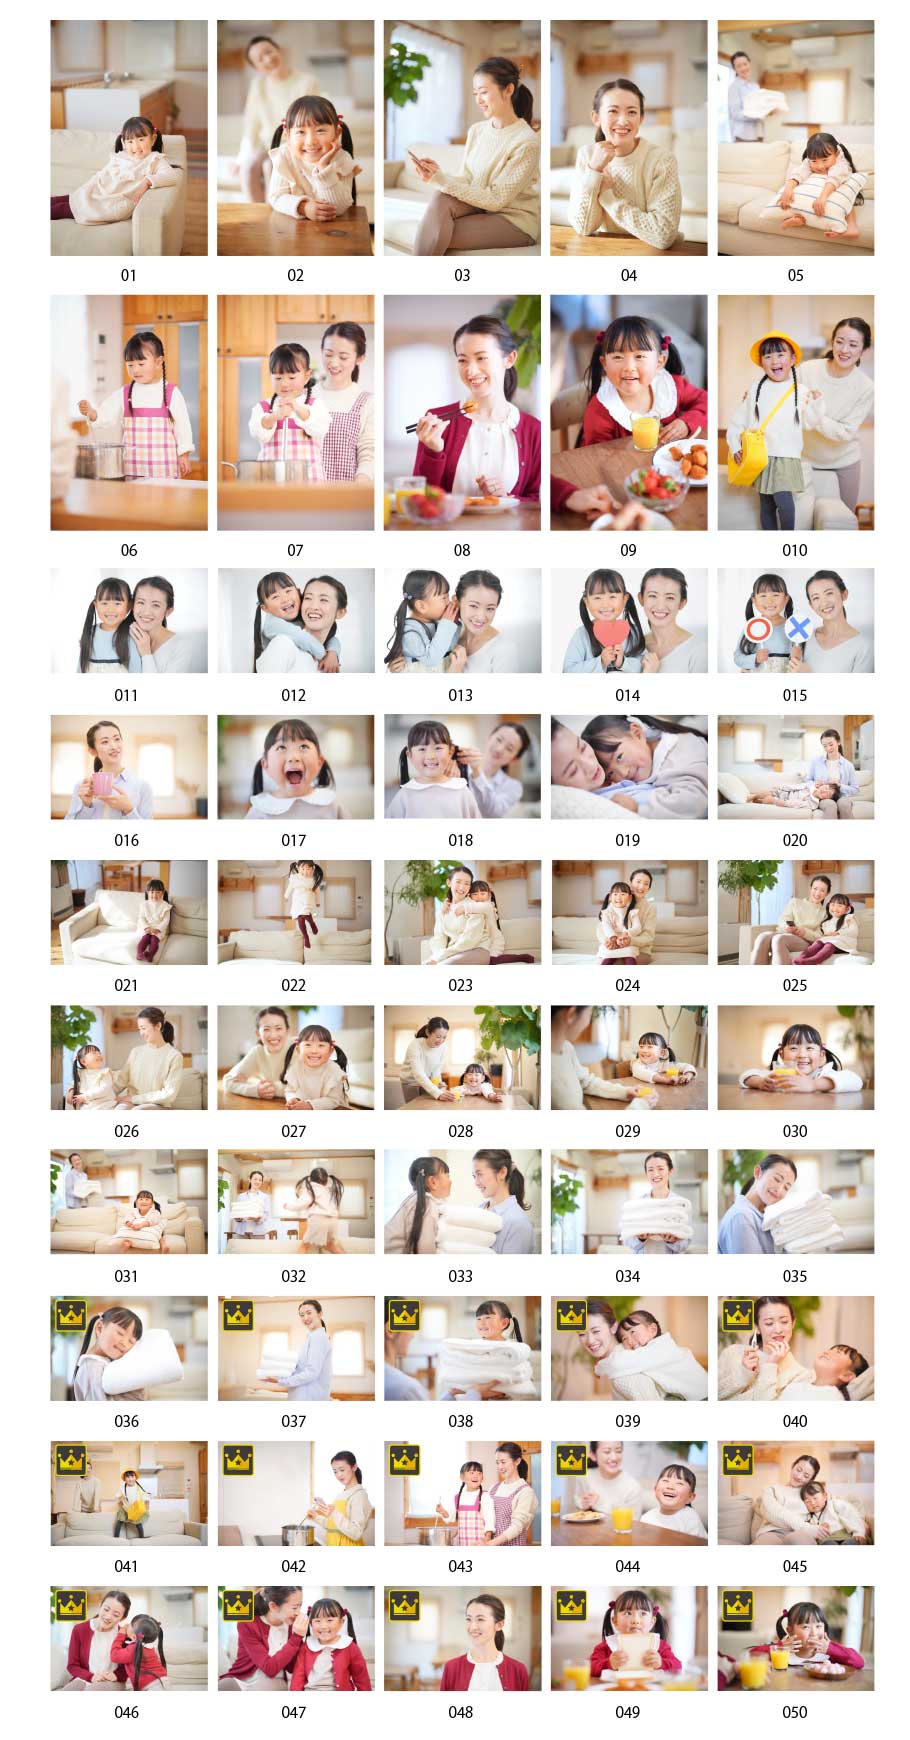 Pictures of Japanese mother and daughter